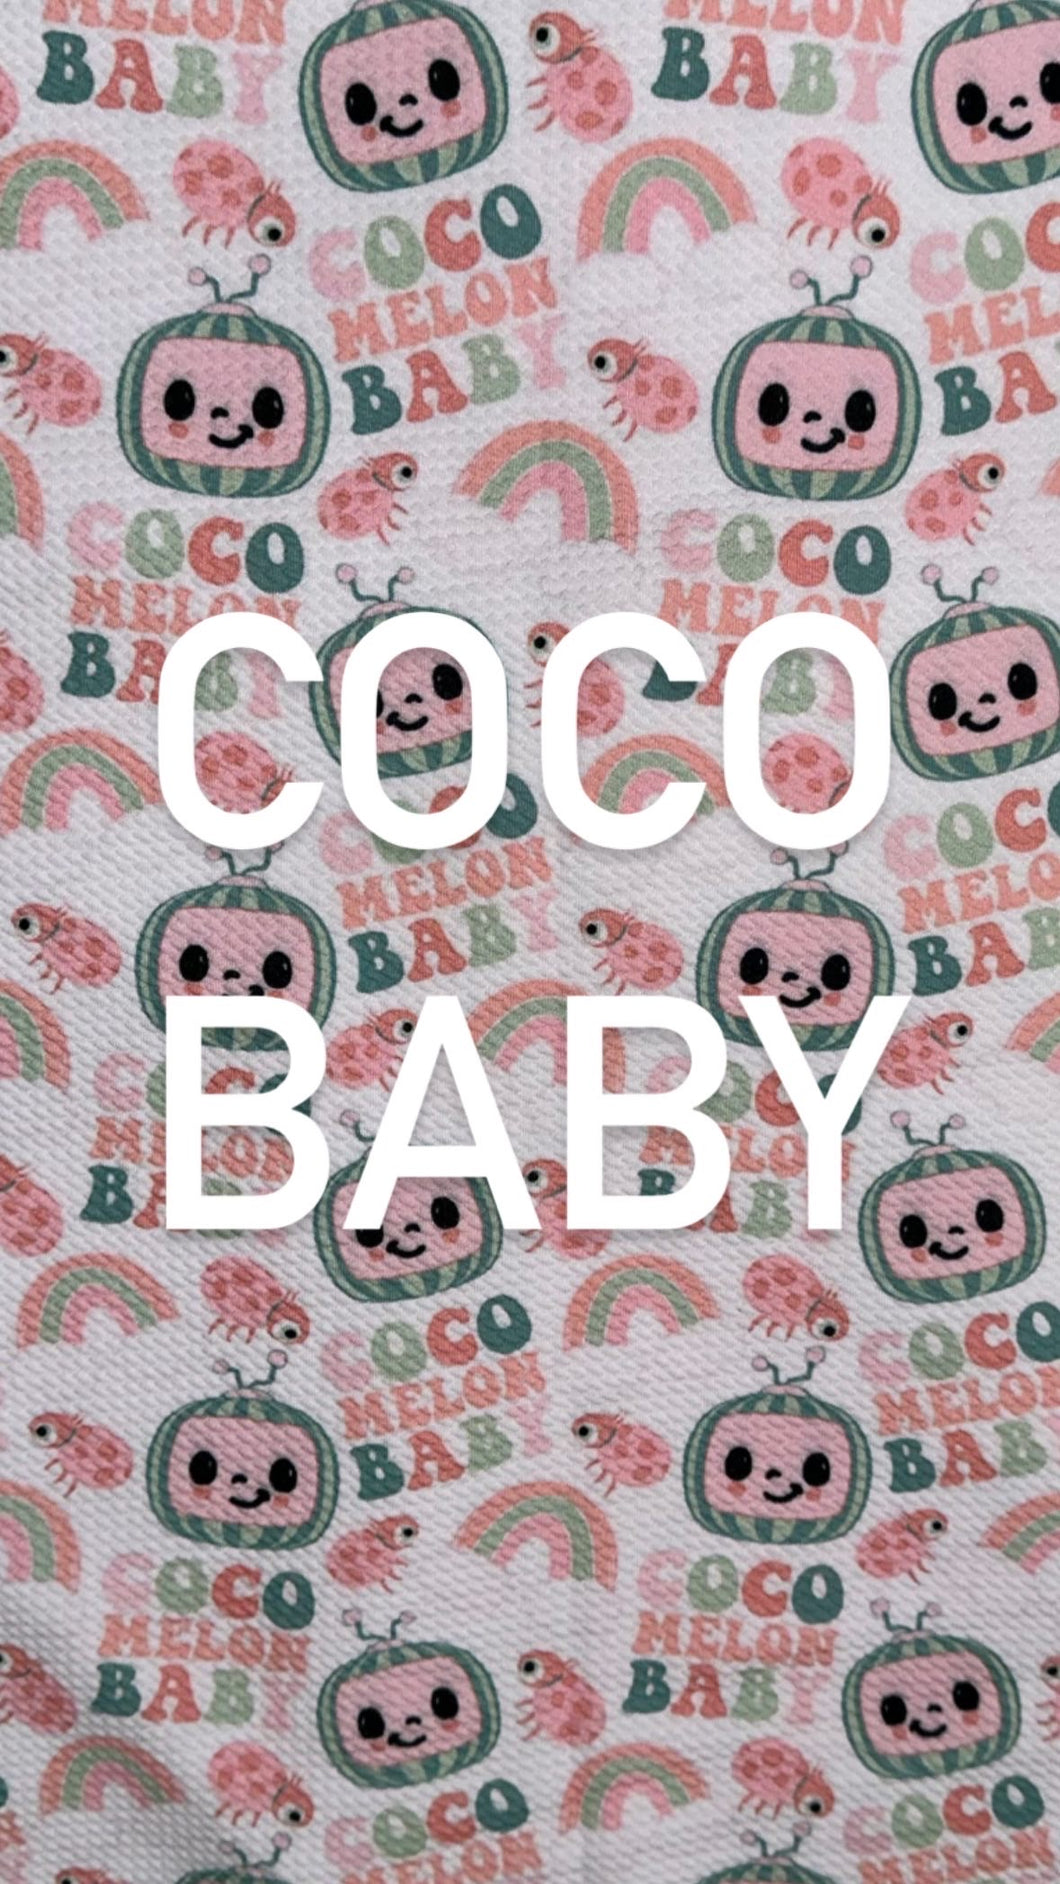 Coco Baby (Multiple Product Options)